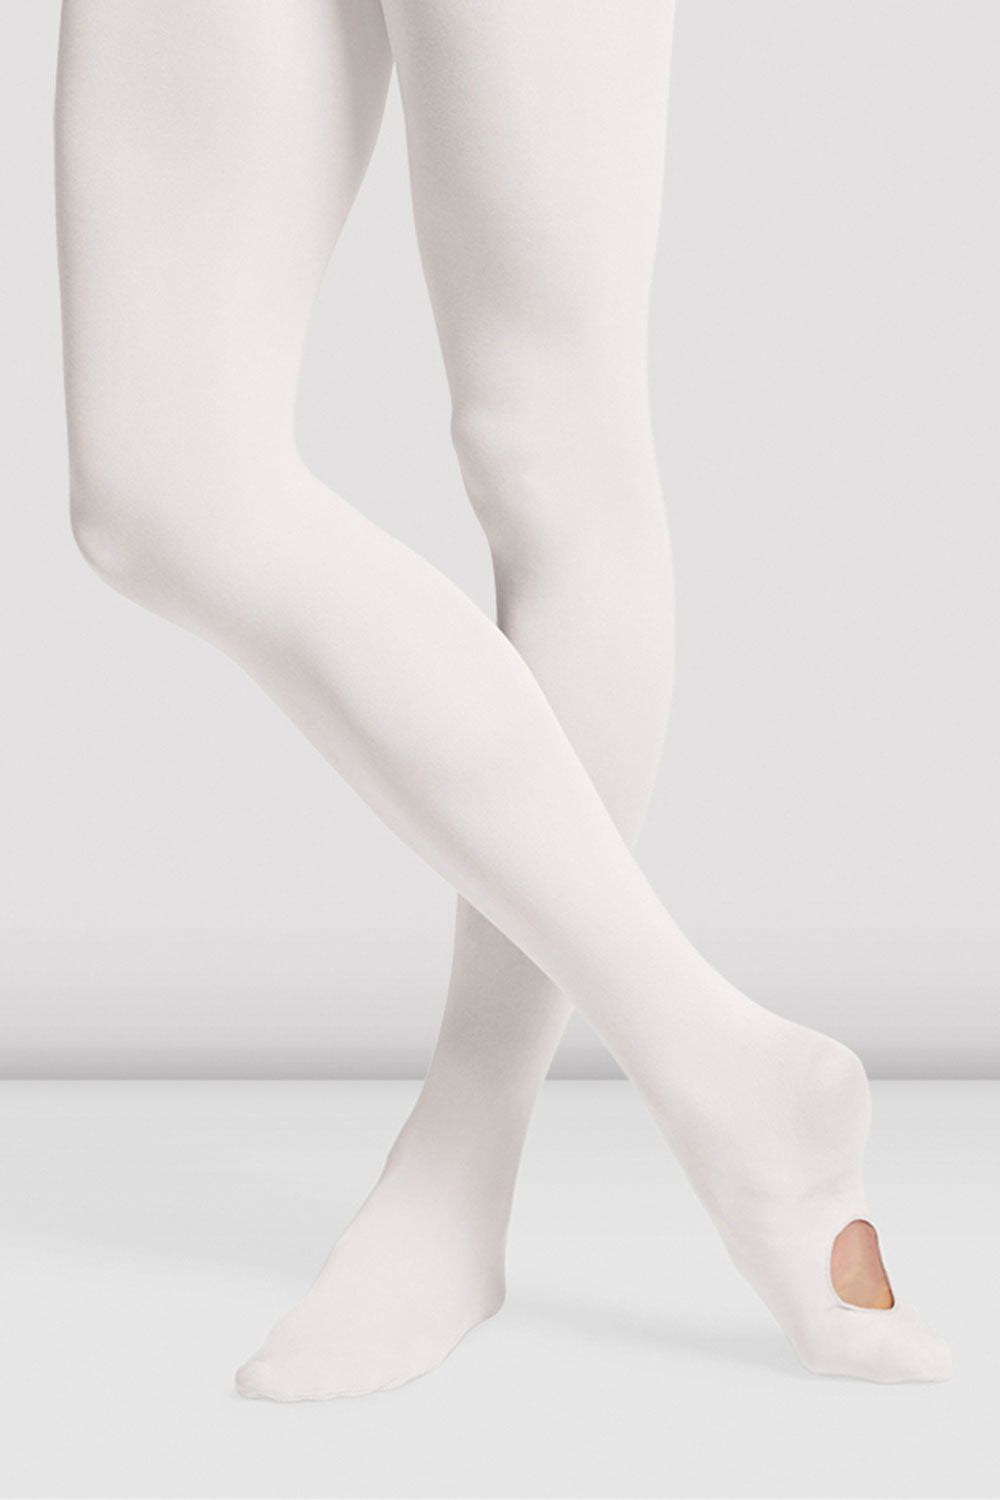 BLOCH Ladies Convertible Tights, White